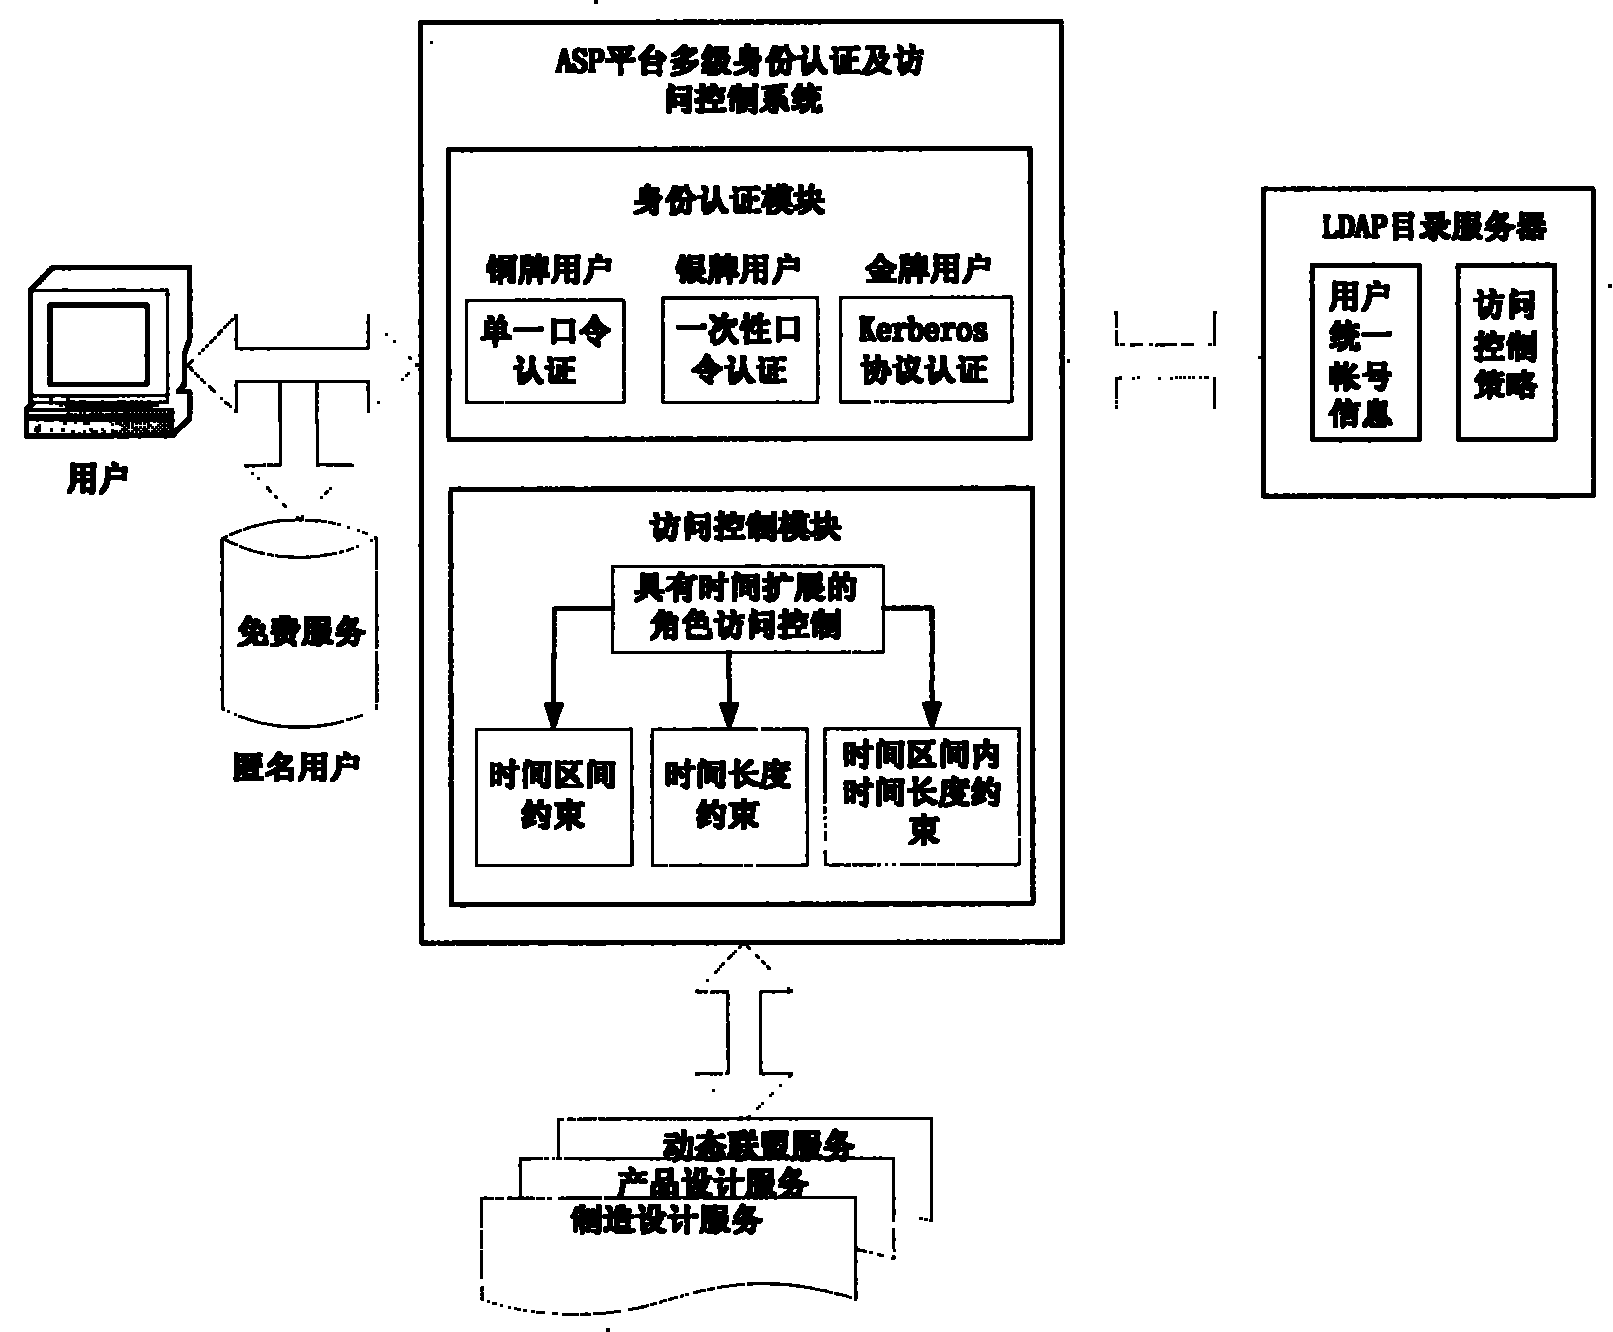 Networking fabrication safety integrating system based on ASP mode